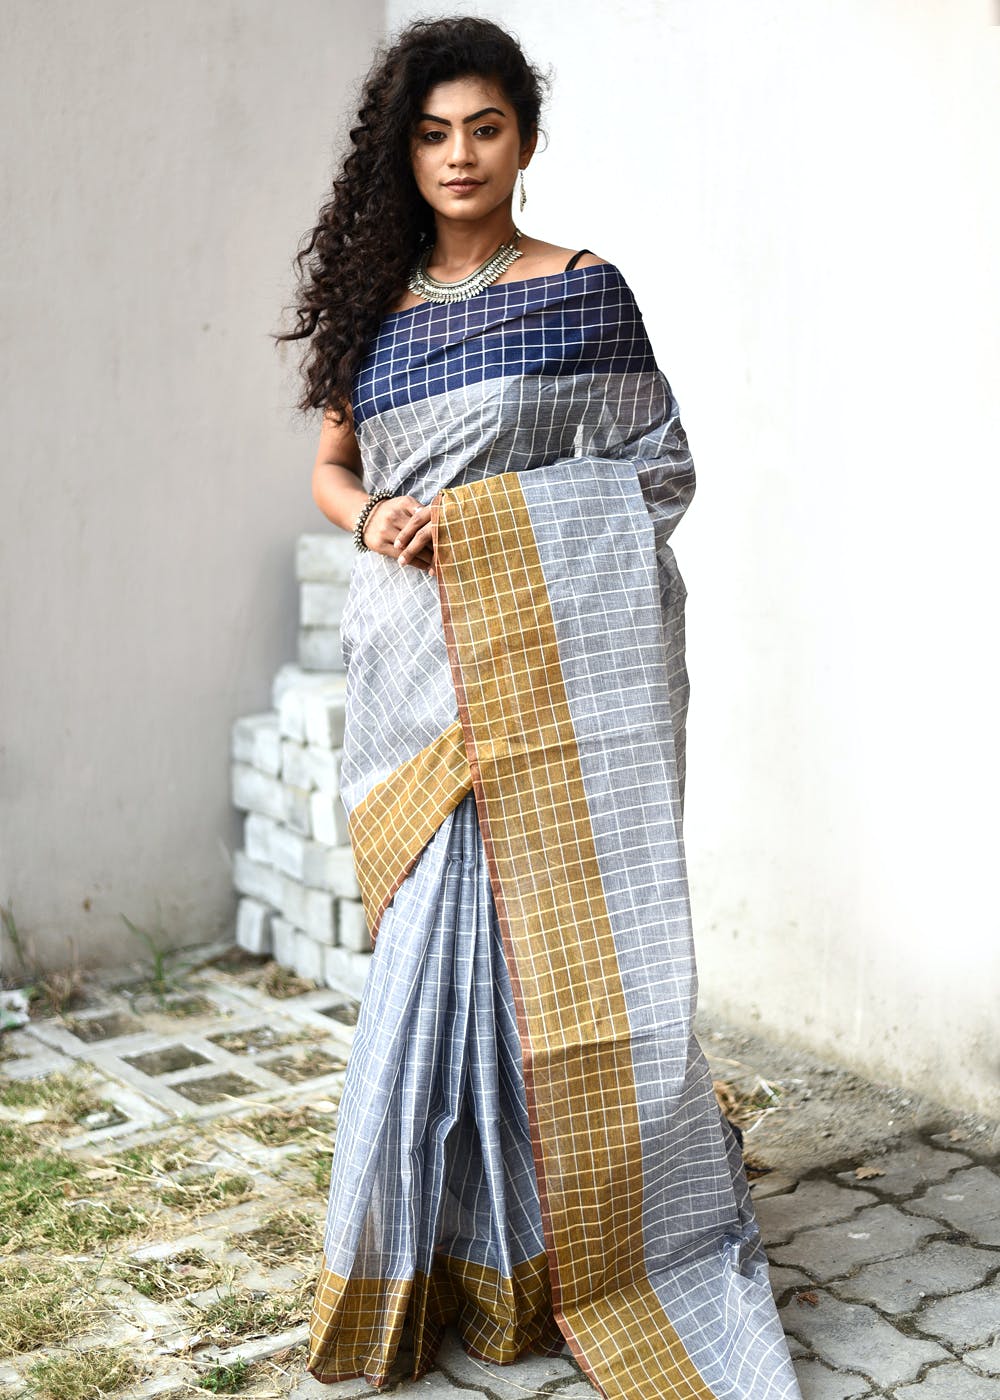 Get Grey Chequered Saree at ₹ 1699 | LBB Shop